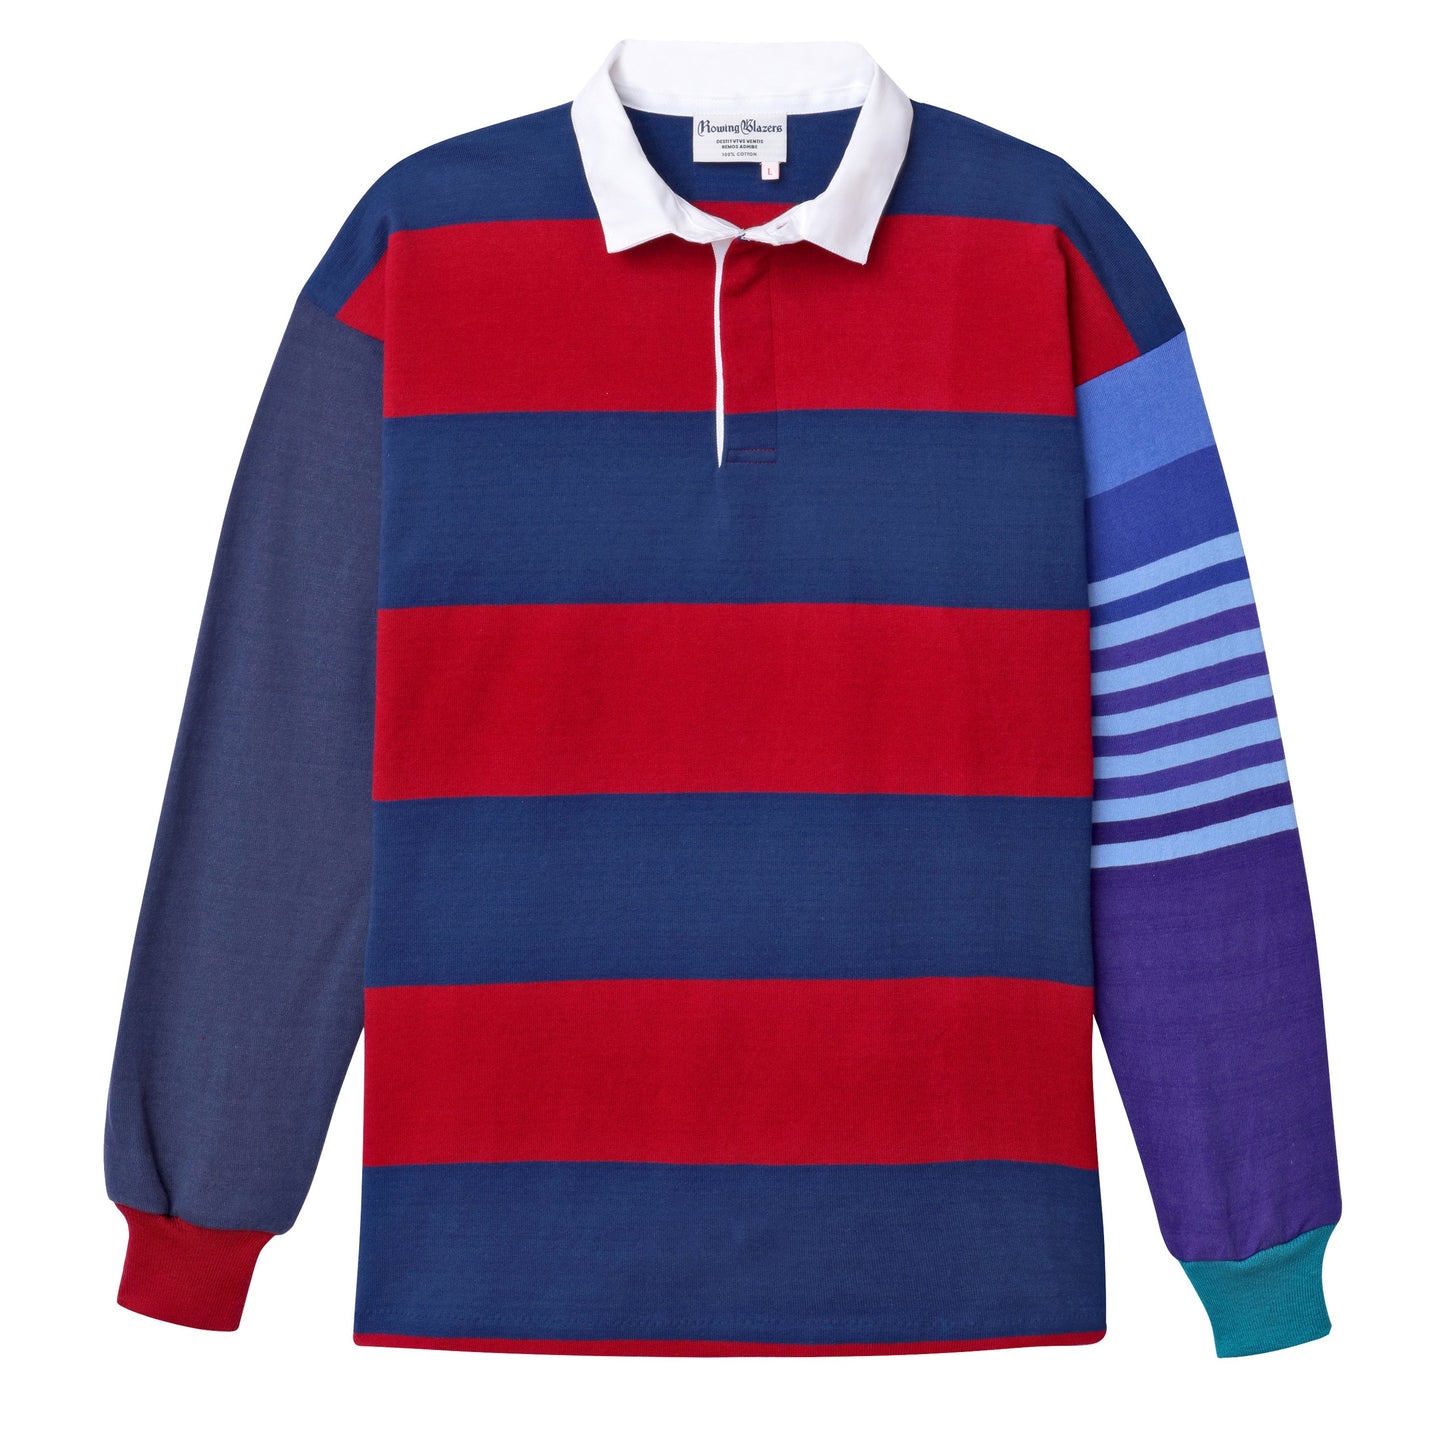 One-of-one striped rugby shirt made from leftover fabric. Blue, red, and purple stripes. Each is unique.